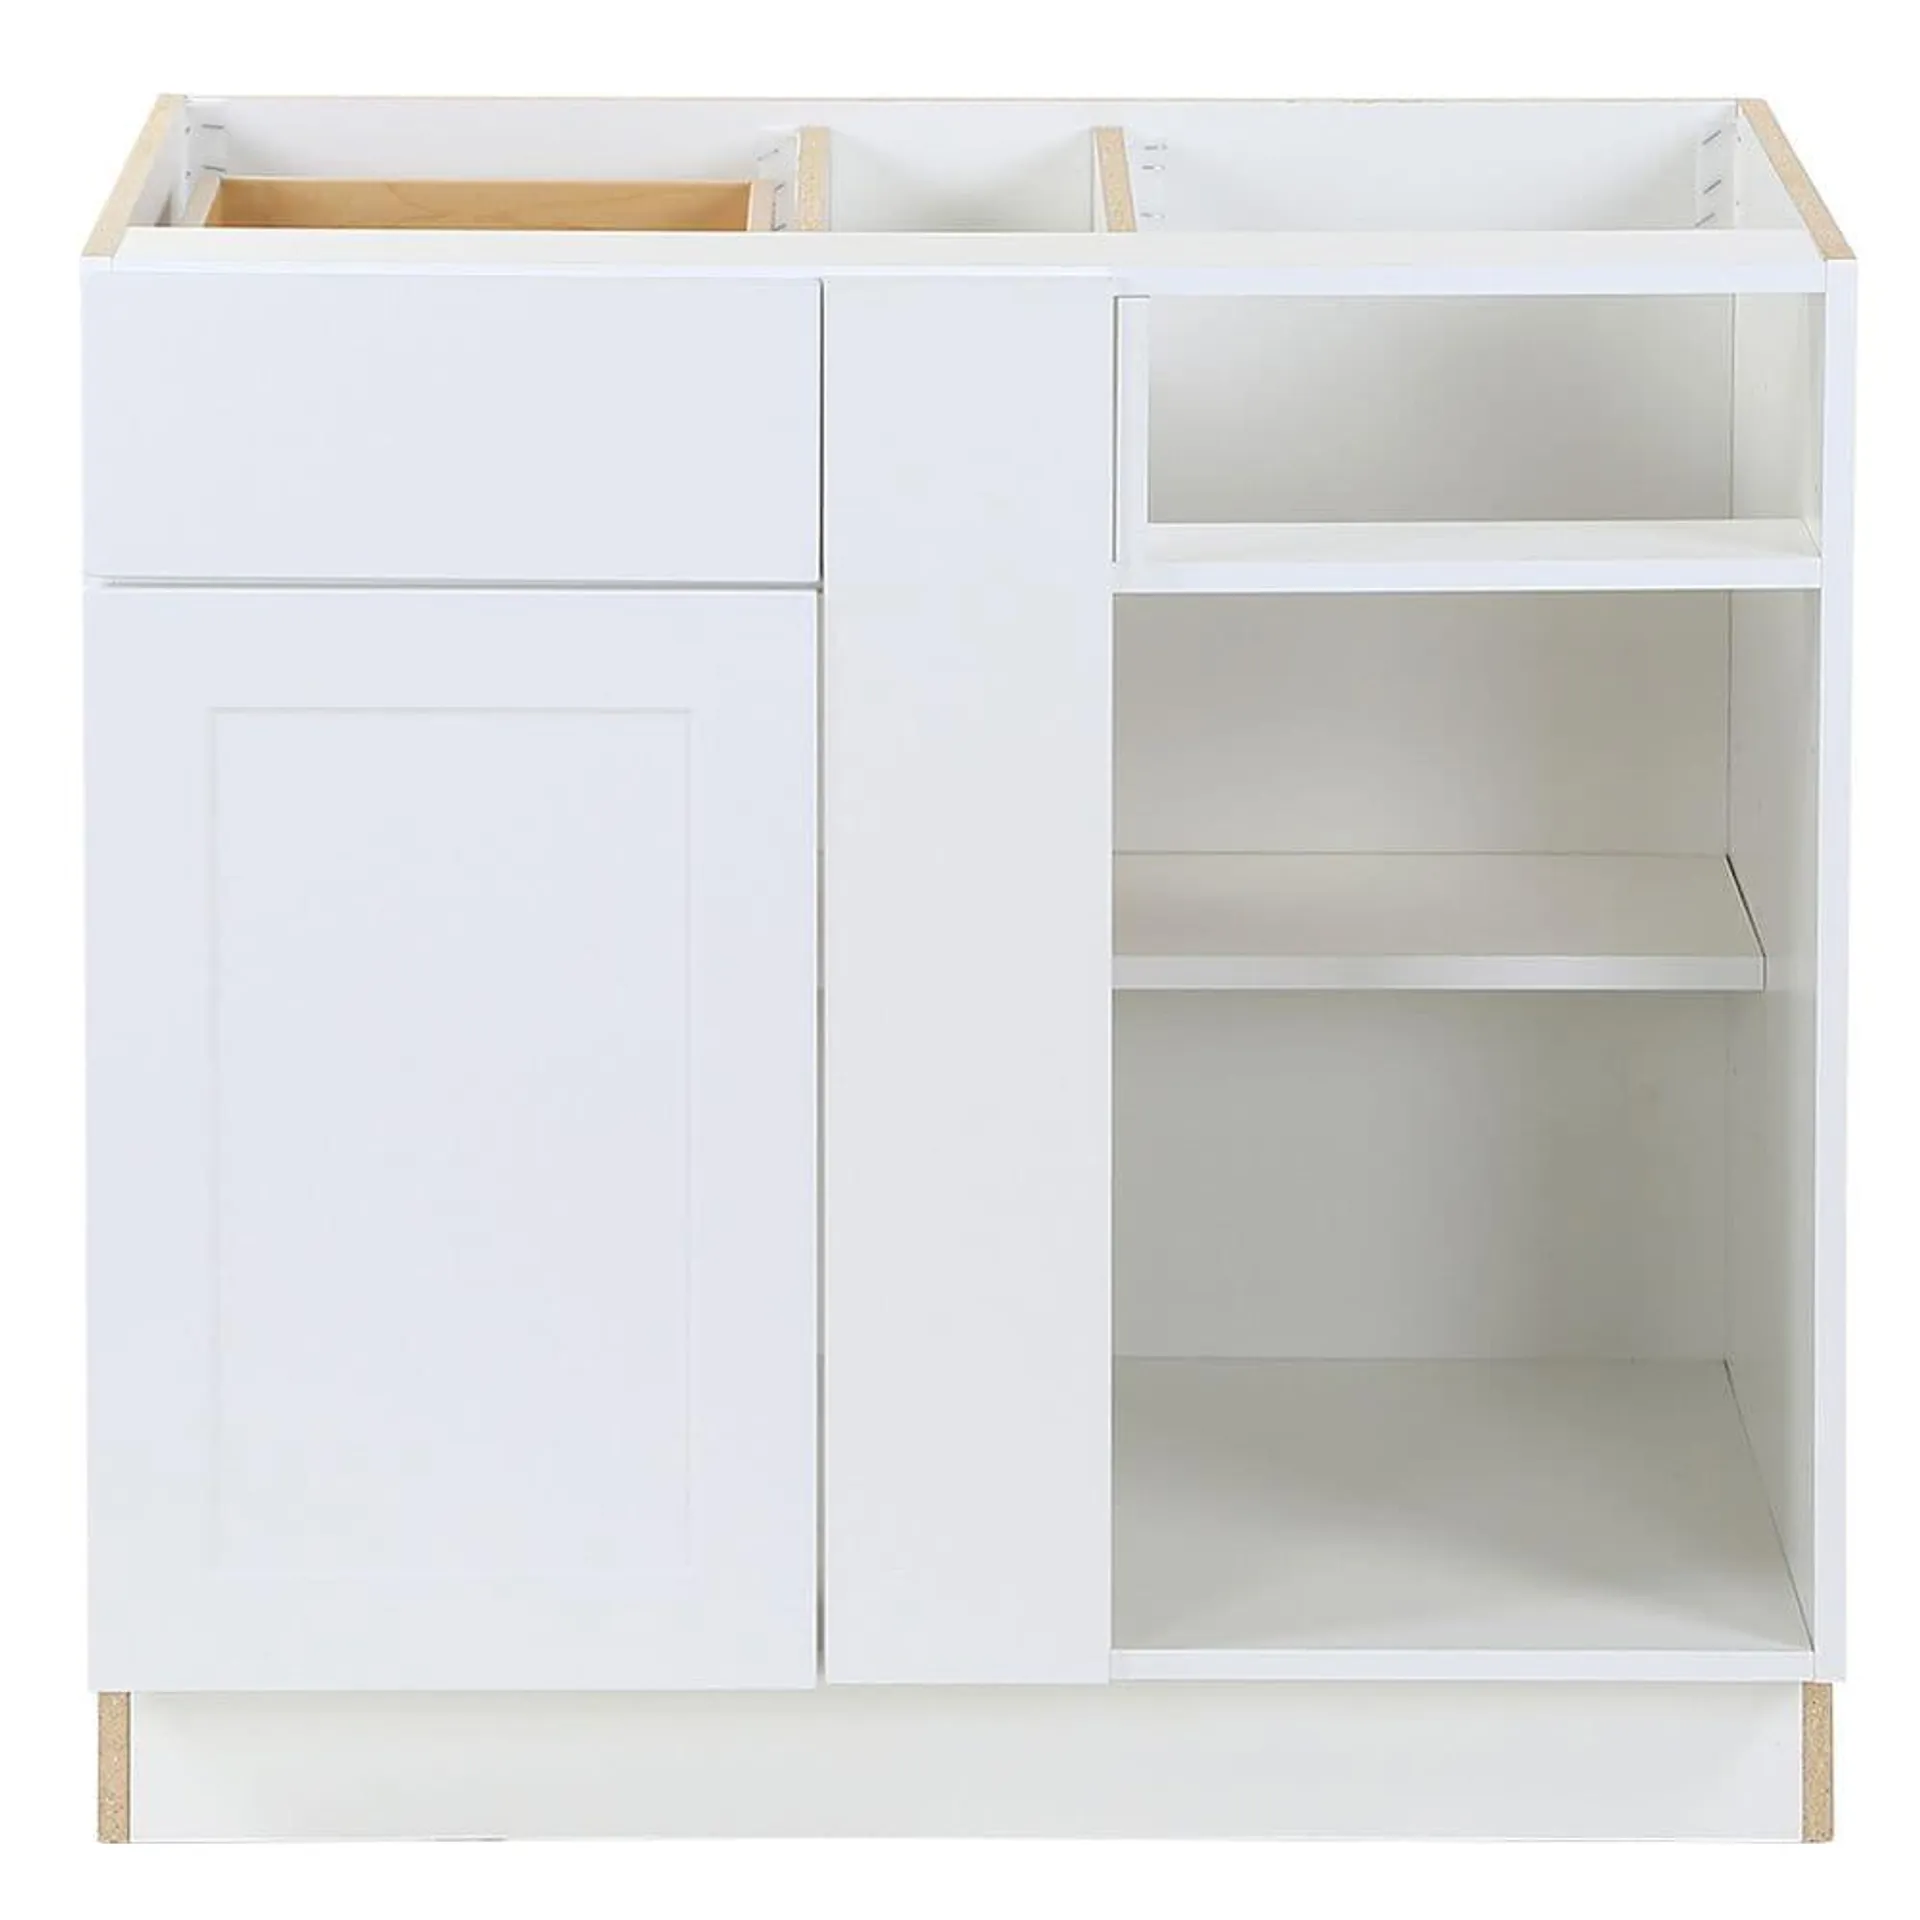 Edson 36-inch W x 34.5-inch H x 24.5-inch D Shaker Style Assembled Kitchen Corner Base Cabinet/Cupboard in Solid White with Adjustable Shelf/Soft Close Drawer (BCL3615)